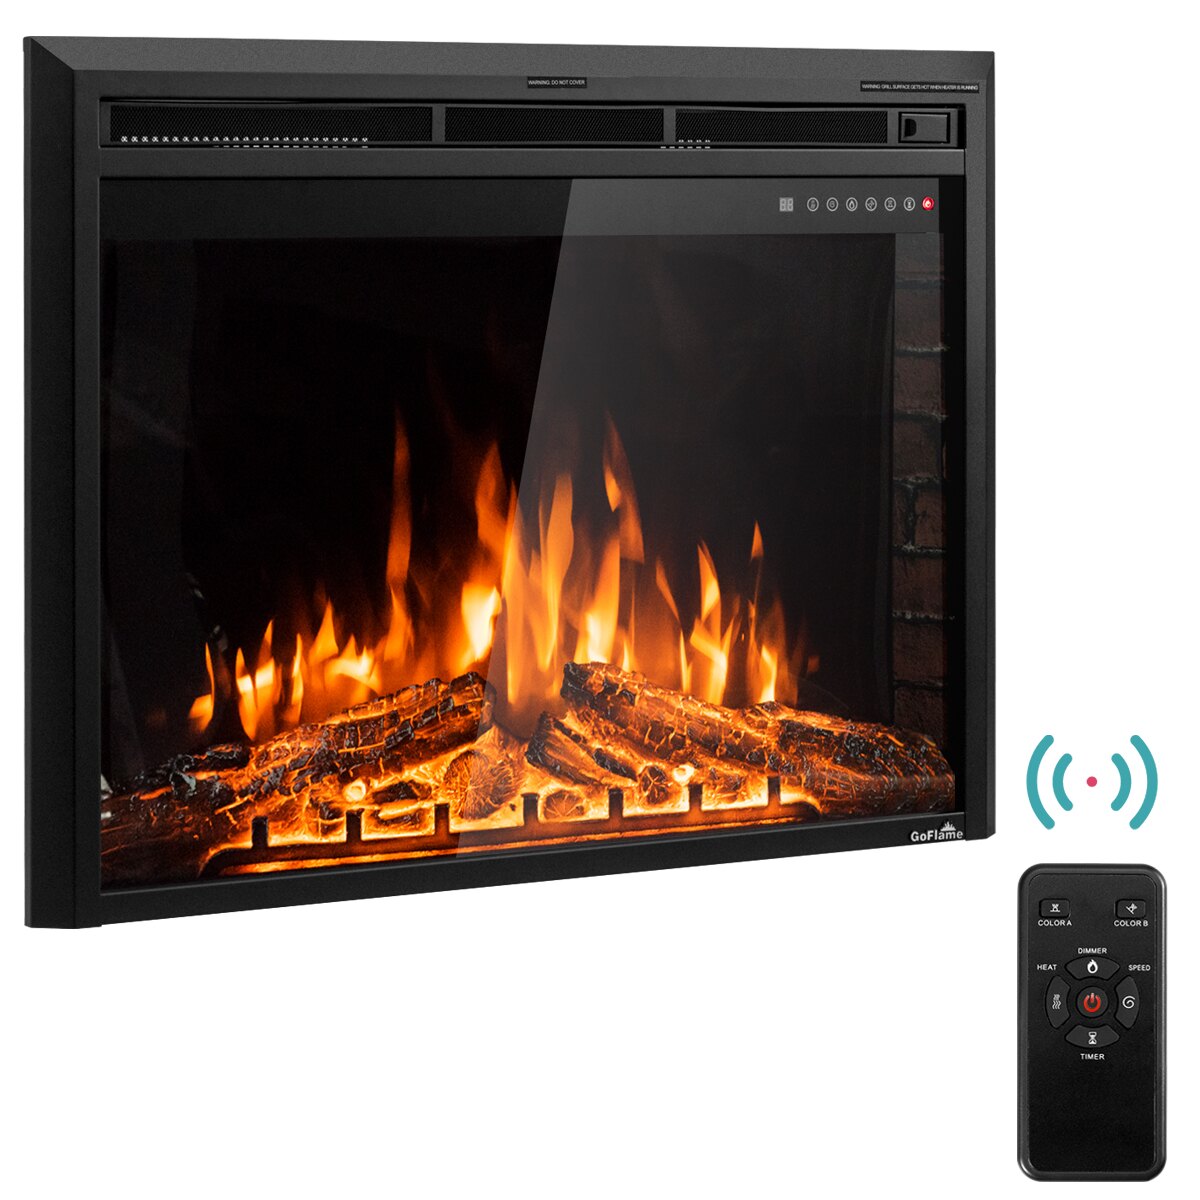 Glass Fireplace Screens Freestanding Unique Goflame 36 750w 1500w Fireplace Heater Electric Embedded Insert Timer Flame Remote